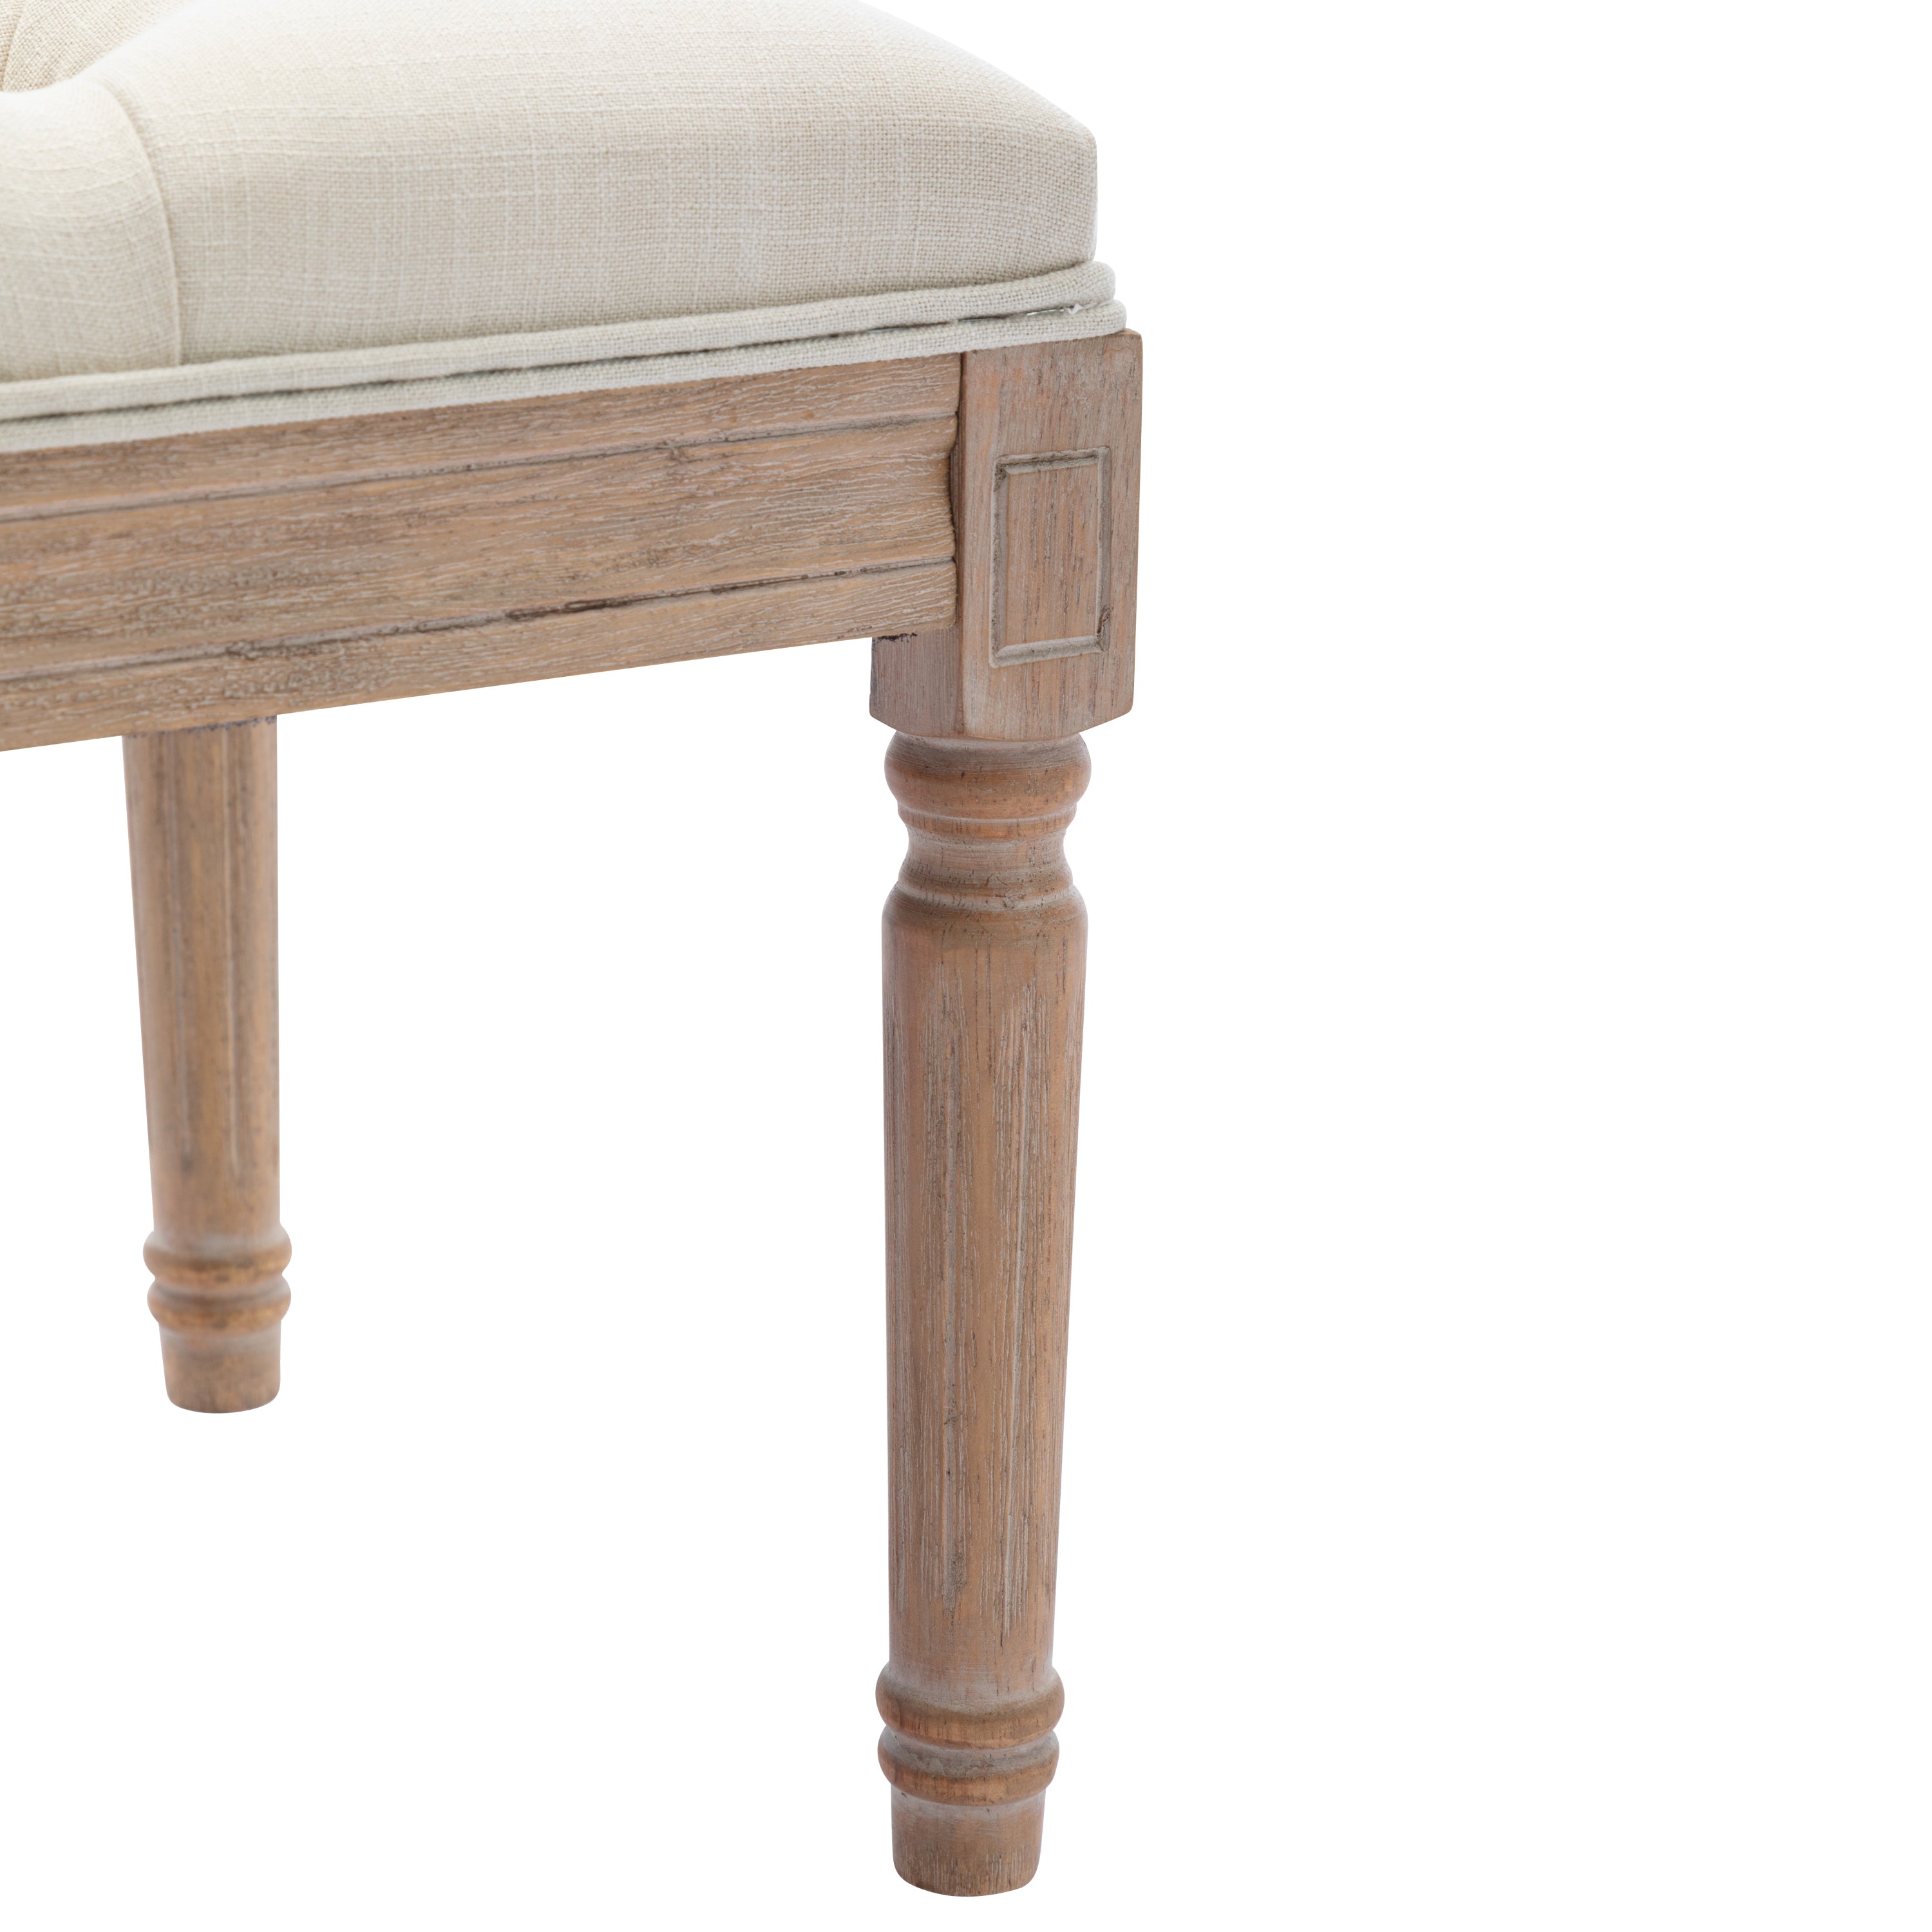 French Bench Upholstered with Ruberwood Legs for Bedroom/Entry/Hallway - Beige